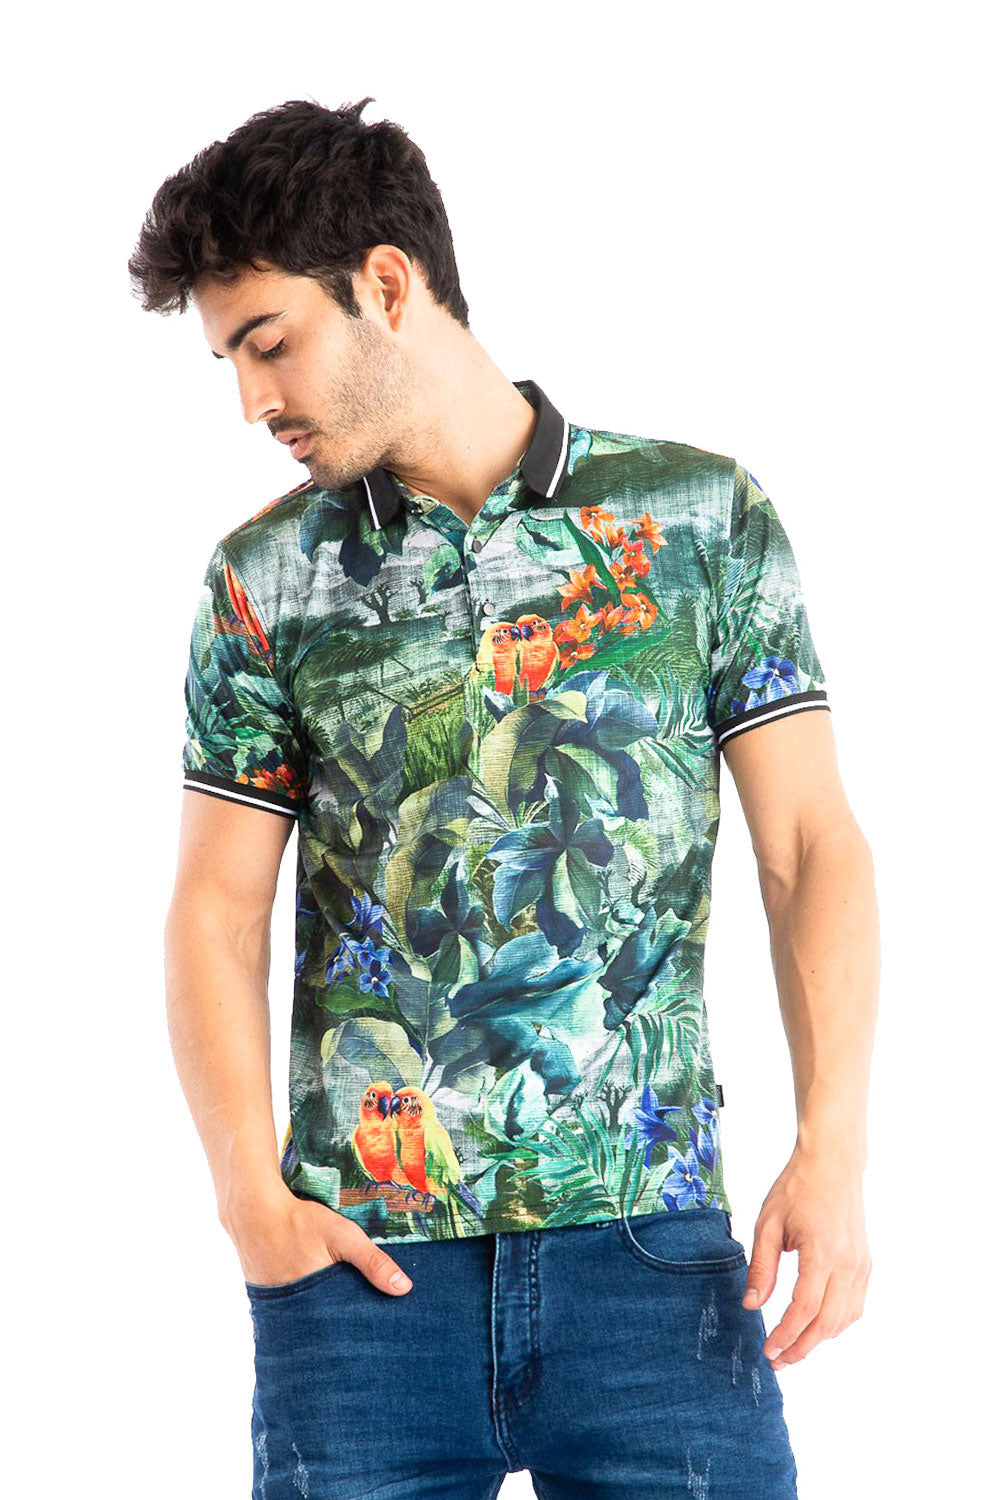 BARABAS MEN Polo Printed Shirts Lost in wilderness P908 Small